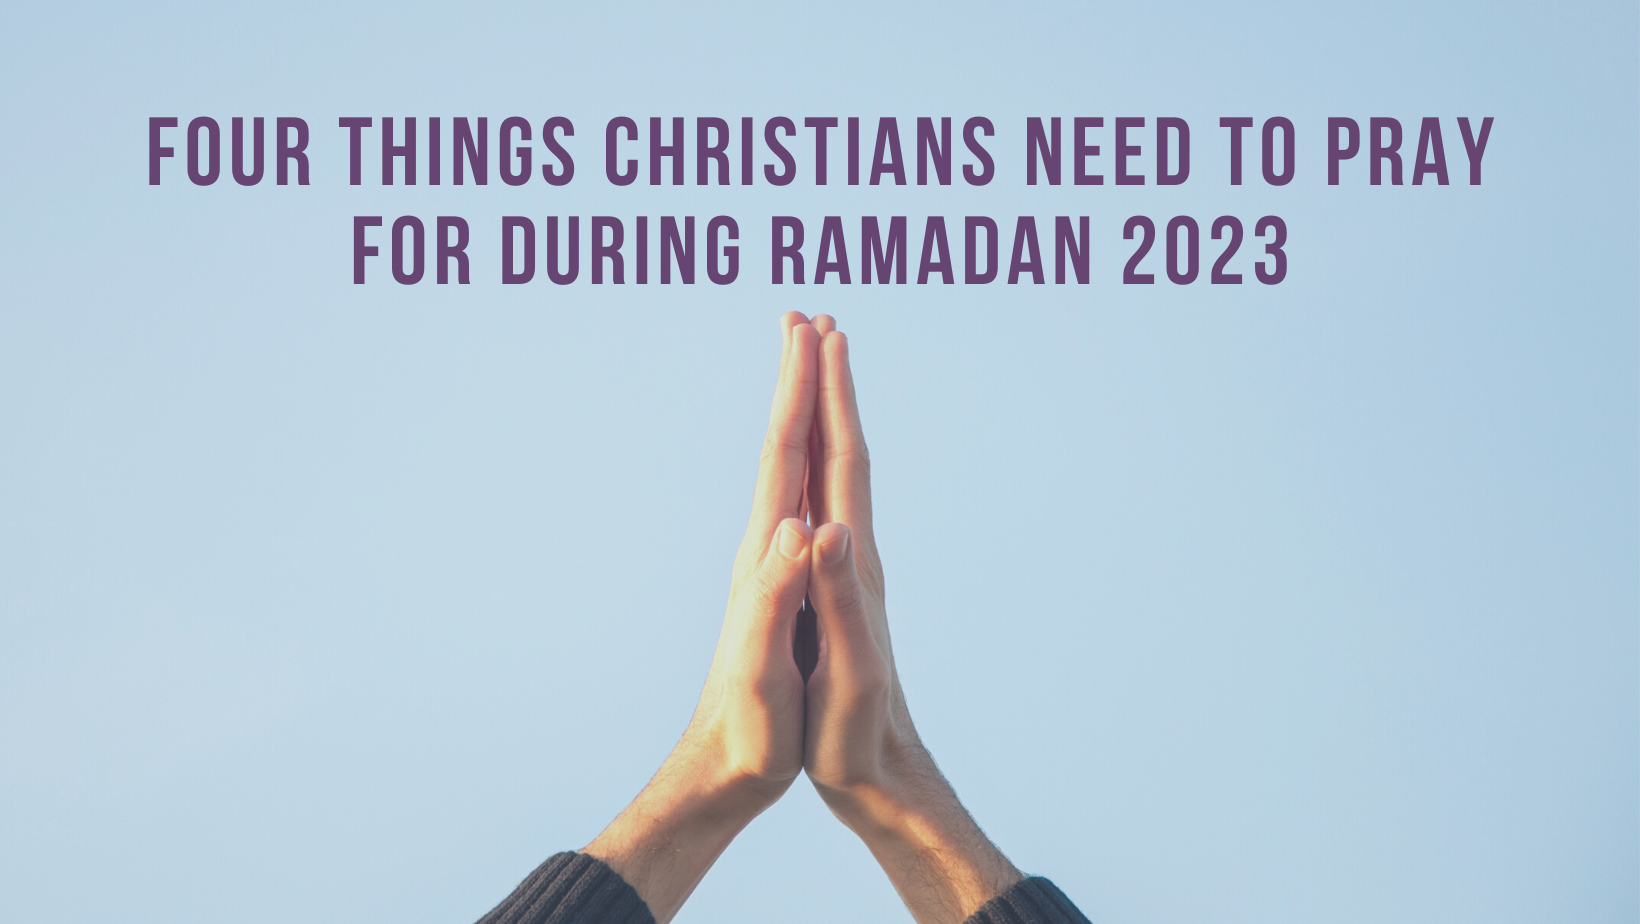 Four things Christians need to pray for during Ramadan 2023